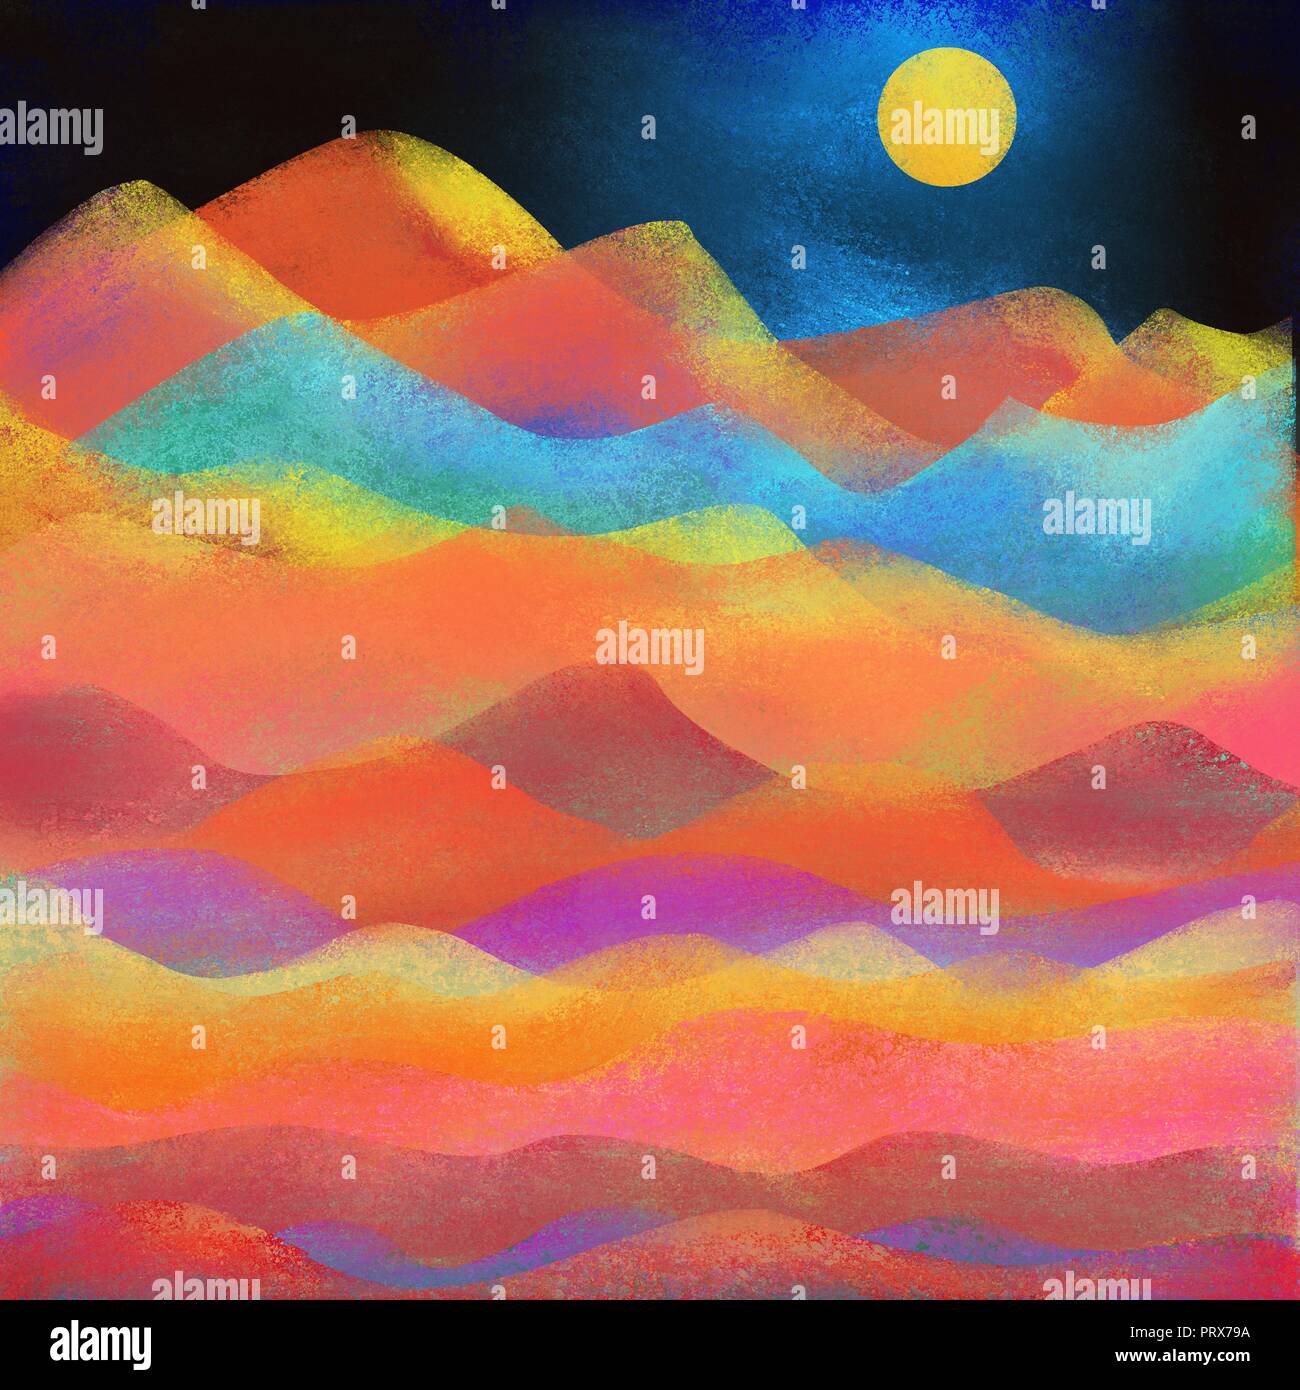 mountain range background in abstract modern art design with full moon in night sky, painted colorful waves and hills in orange purple red and blue Stock Photo